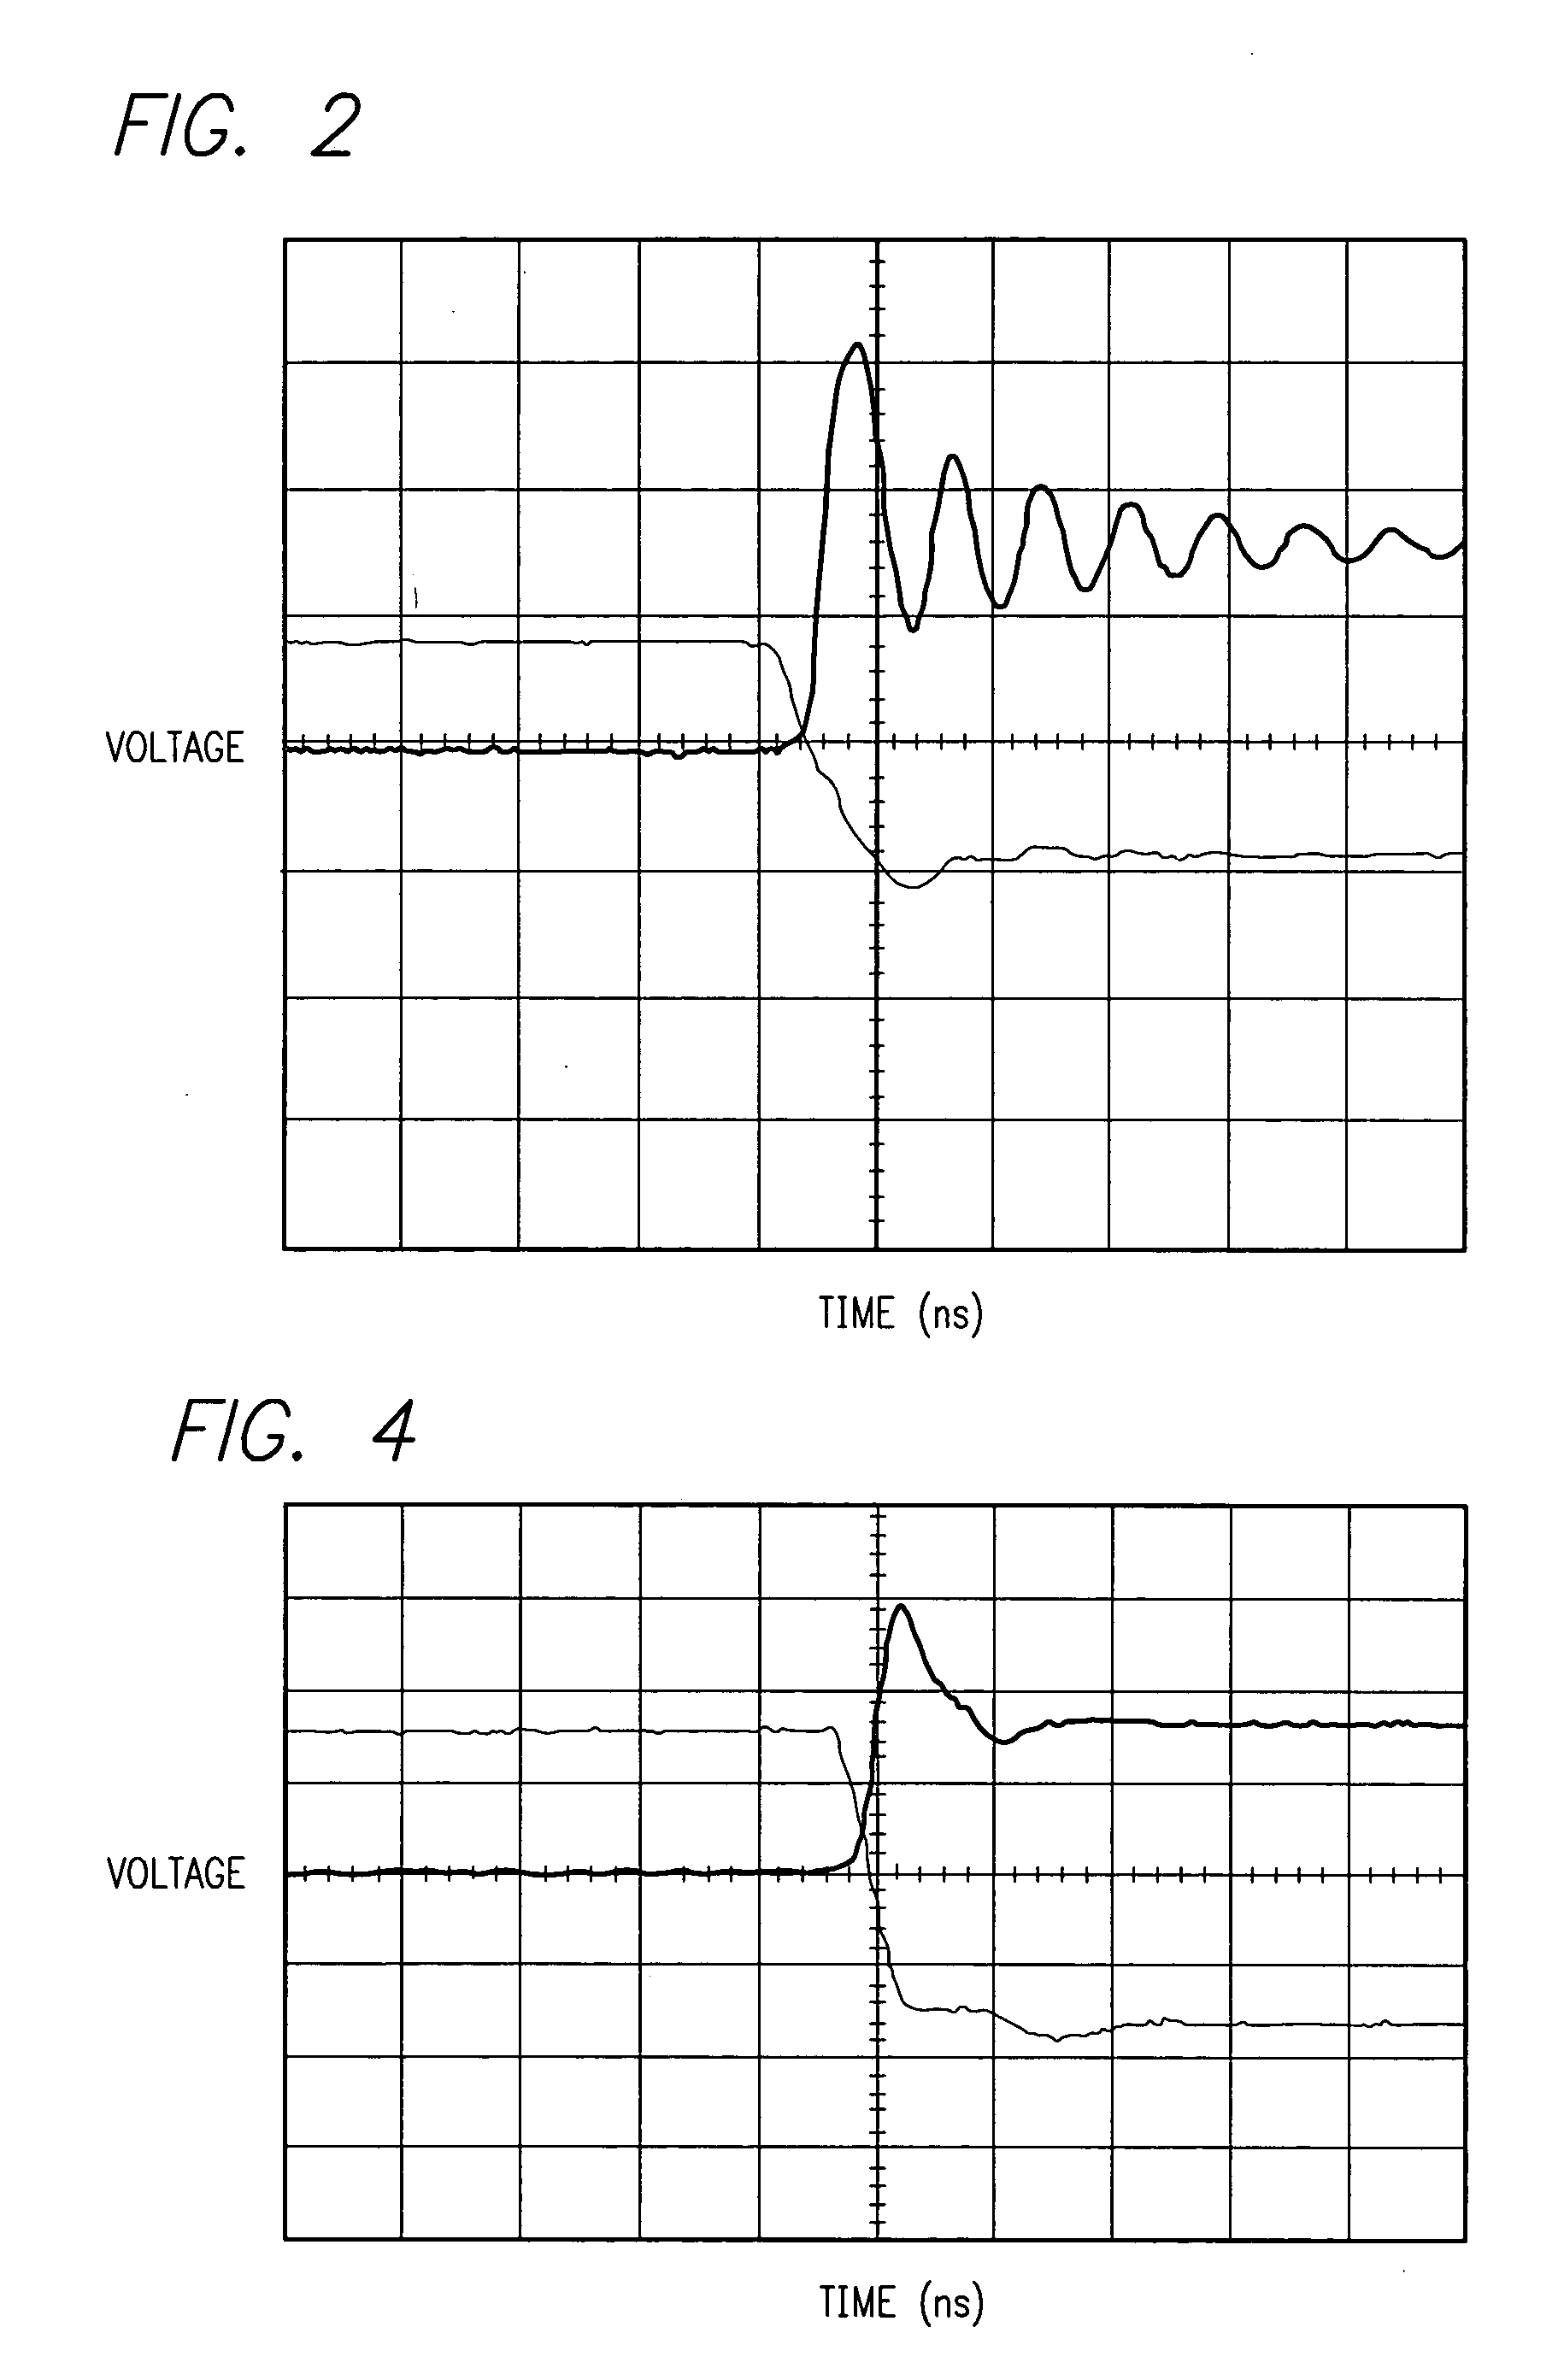 Unregulated DC-DC converter having synchronous rectification with efficient gate drives